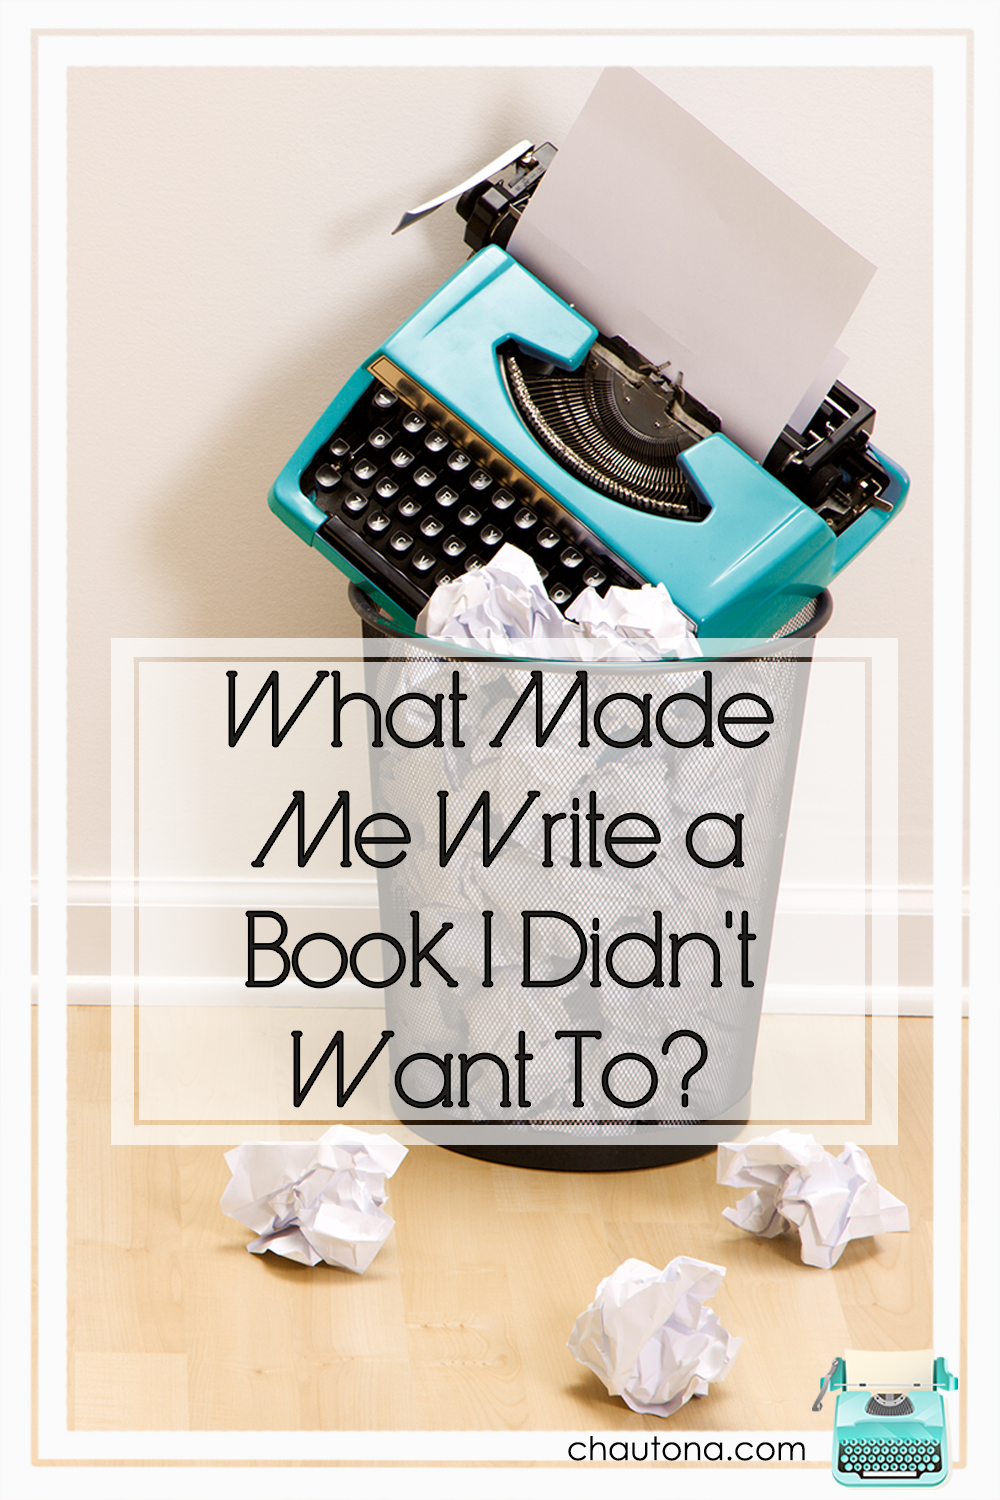 What Made Me Write a Book I Didn't Want To?